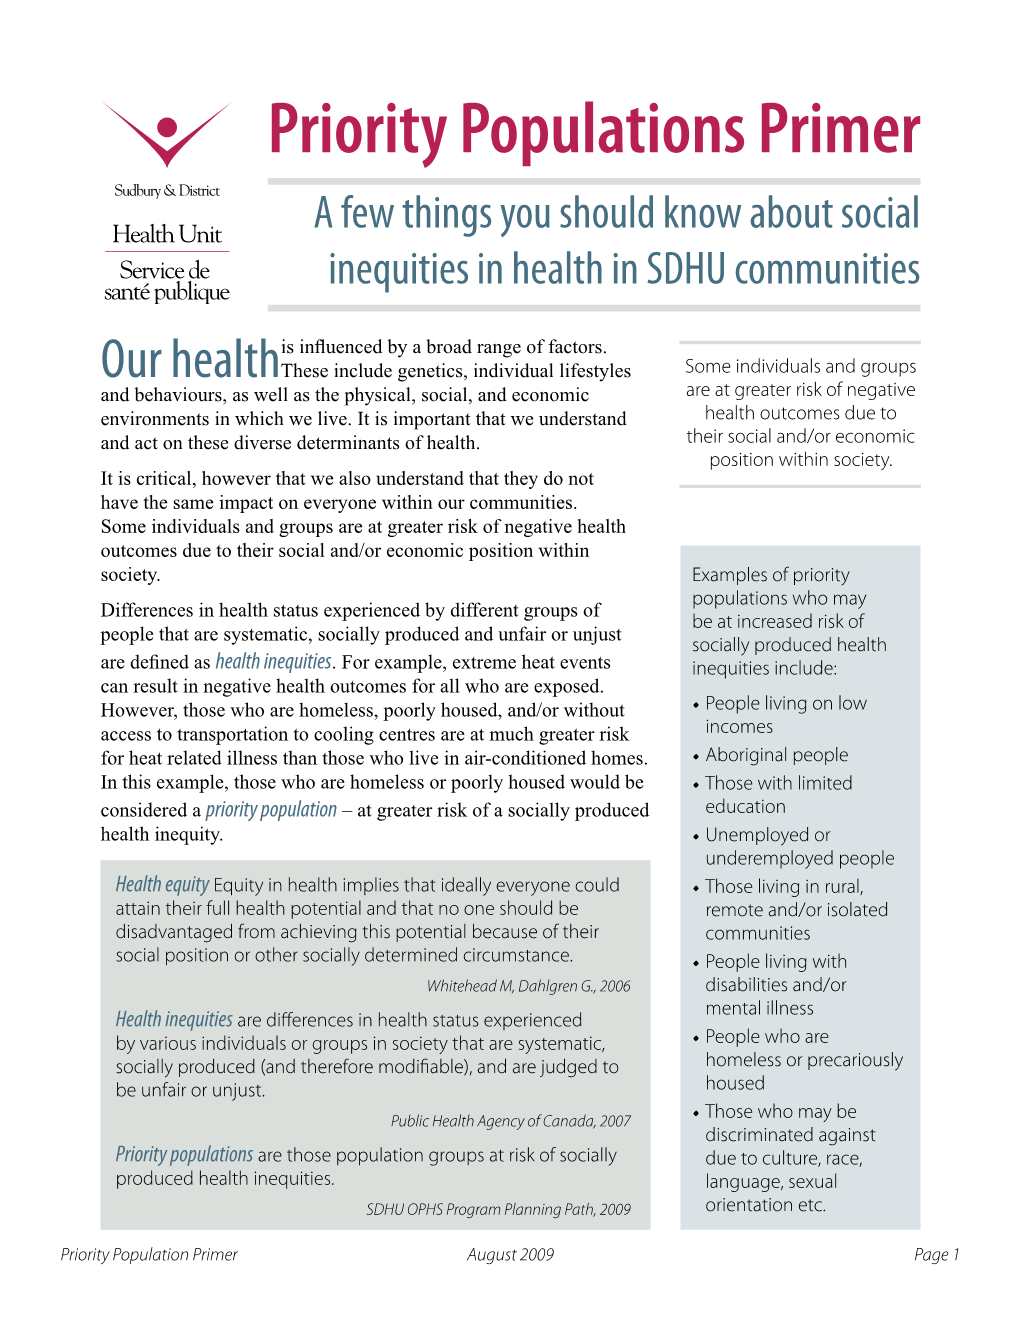 Priority Populations Primer a Few Things You Should Know About Social Inequities in Health in SDHU Communities